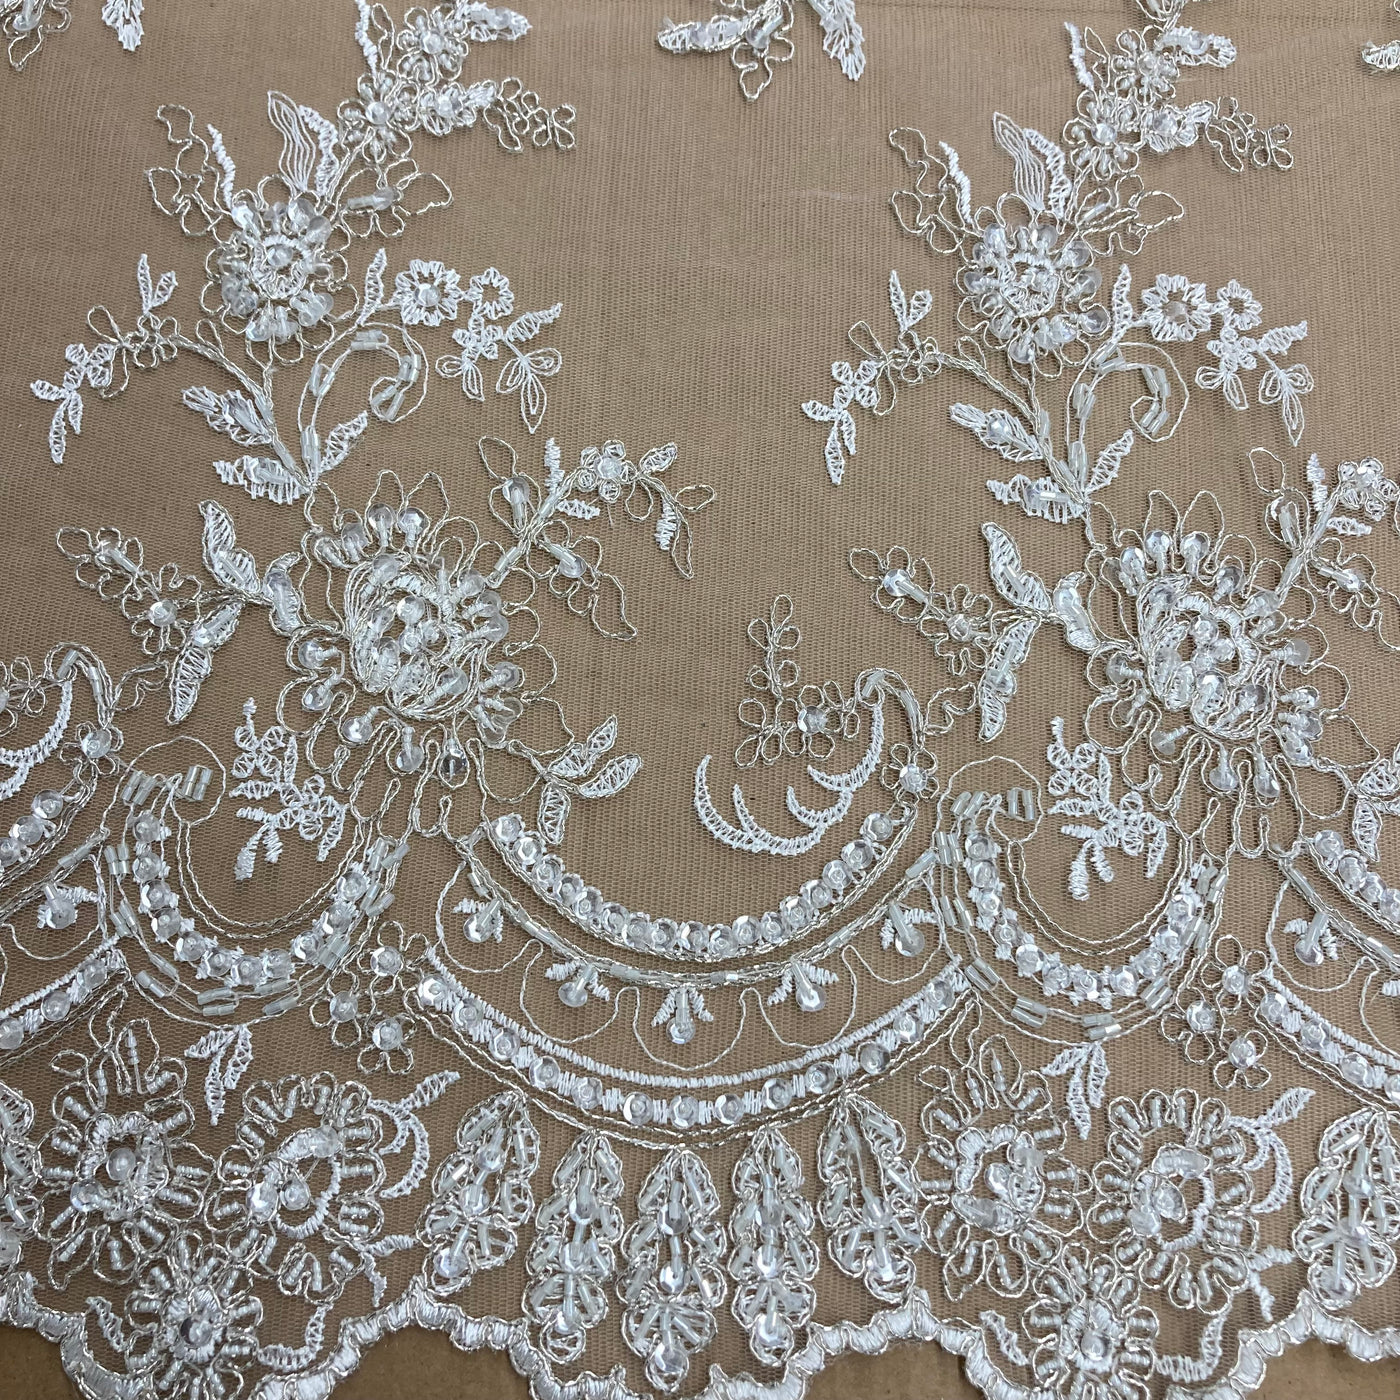 Ivory with Silver Corded & Beaded Bridal Lace Fabric Embroidered on 100% Polyester Net Mesh